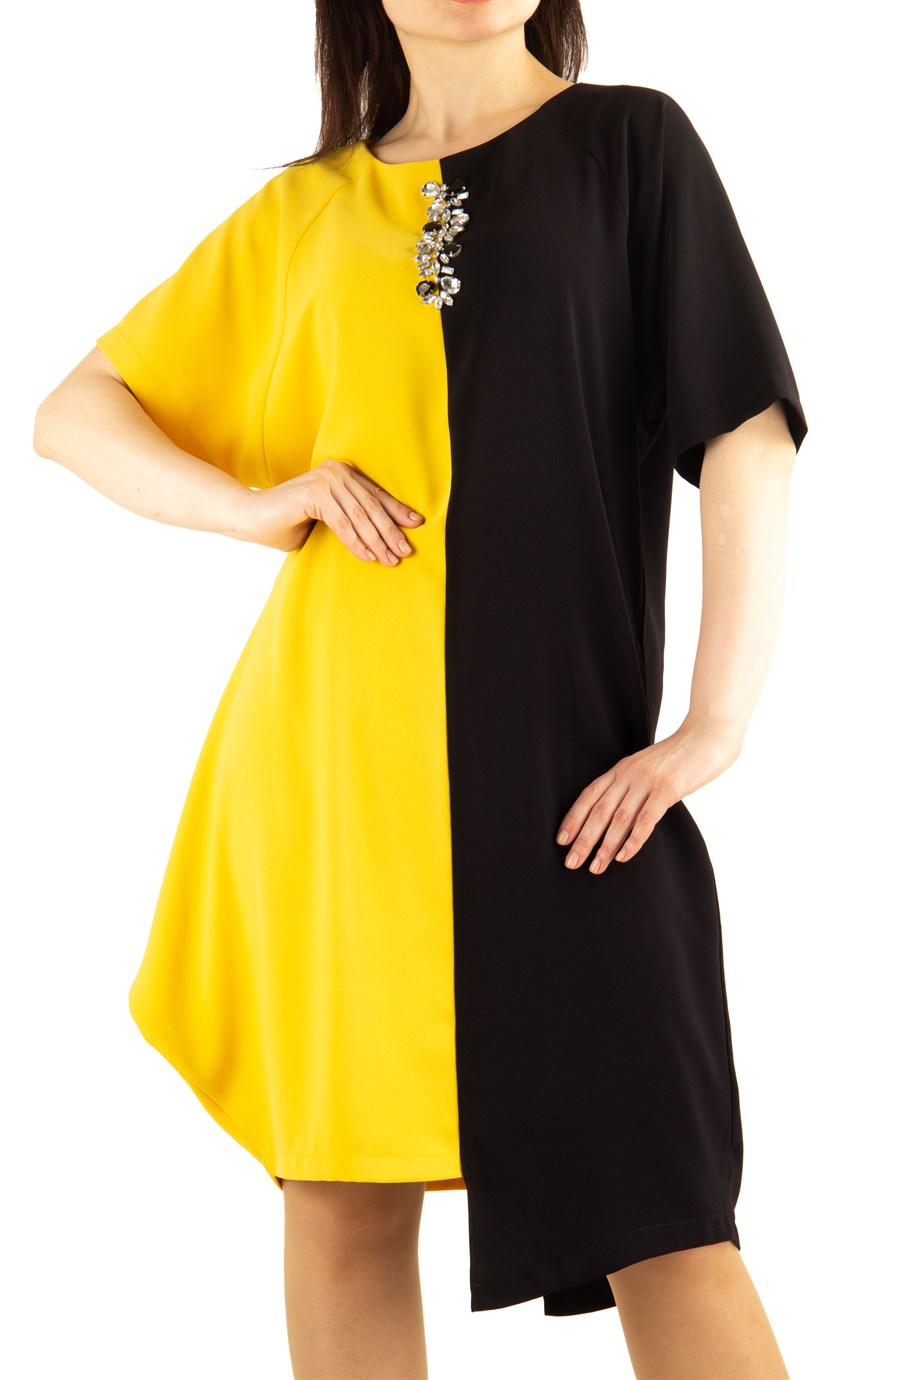 Two Tone Batwing Sleeve Dress With Brooch - Yellow/Black - Wholesale Womens  Clothing Vendors For Boutiques